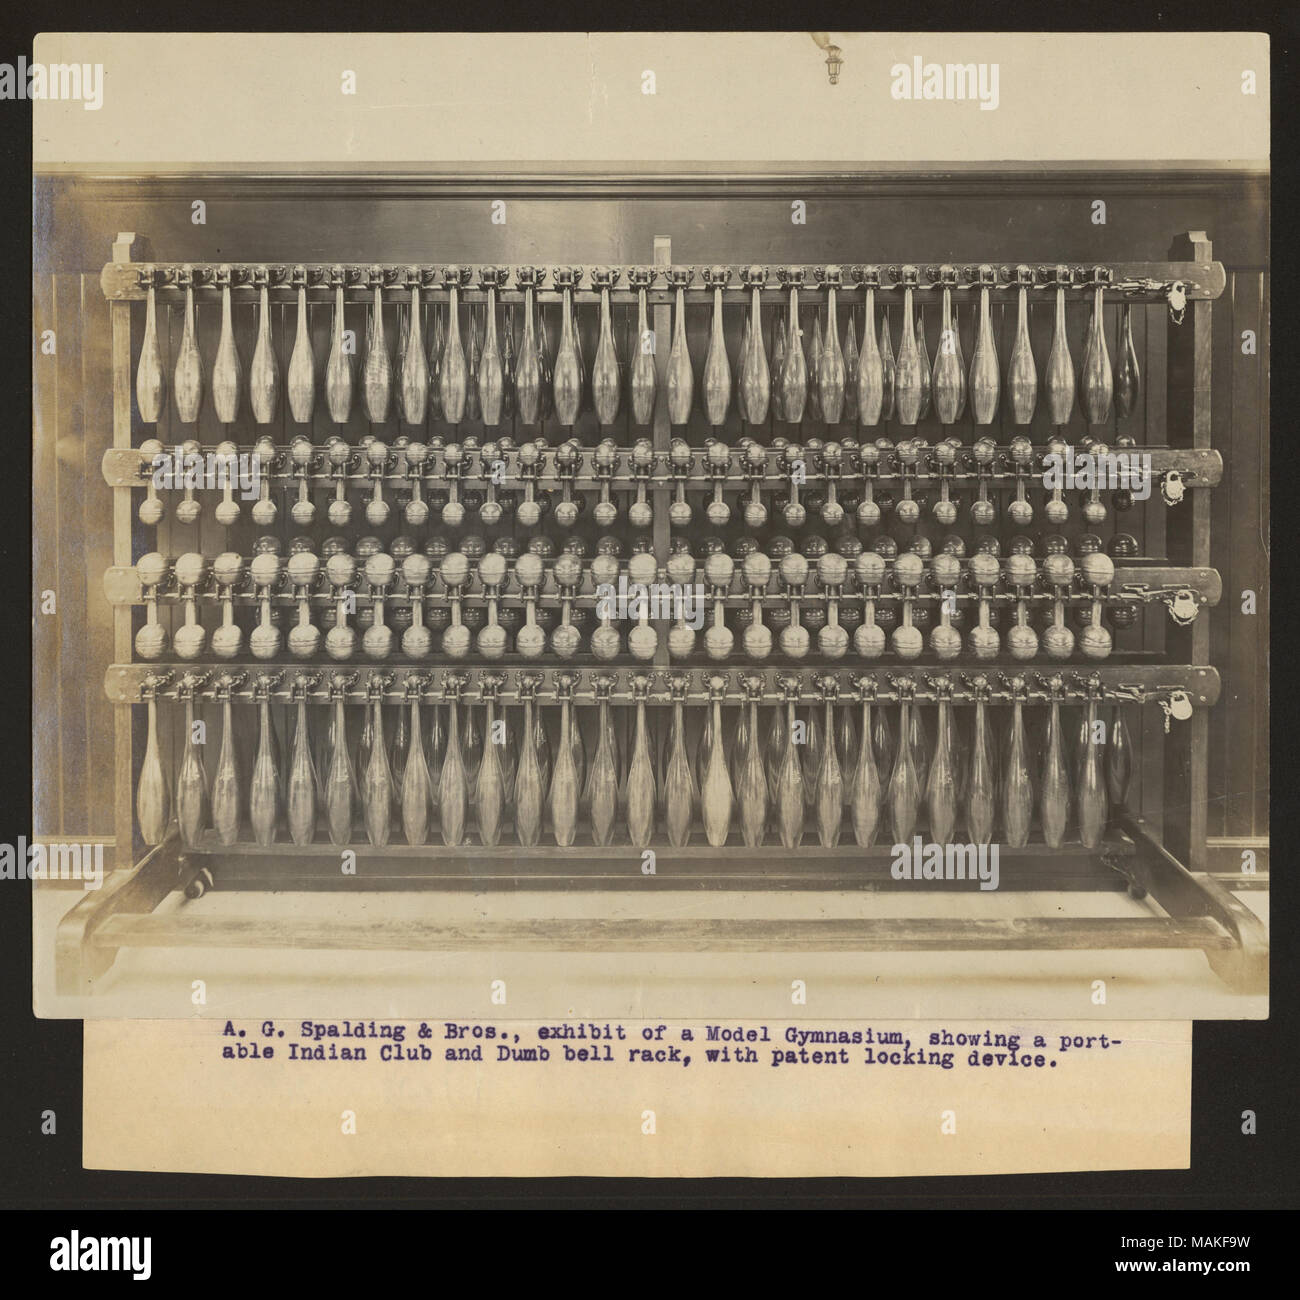 Horizontal photograph of a dumbbell rack with four rows of dumbbells in various sizes and two shapes. Title: 'A. G. Spalding and Bros., exhibit of a Model Gymnasium, showing a port-able Indian Club and Dumb bell rack, with patent locking device.'  . 1904. Stock Photo